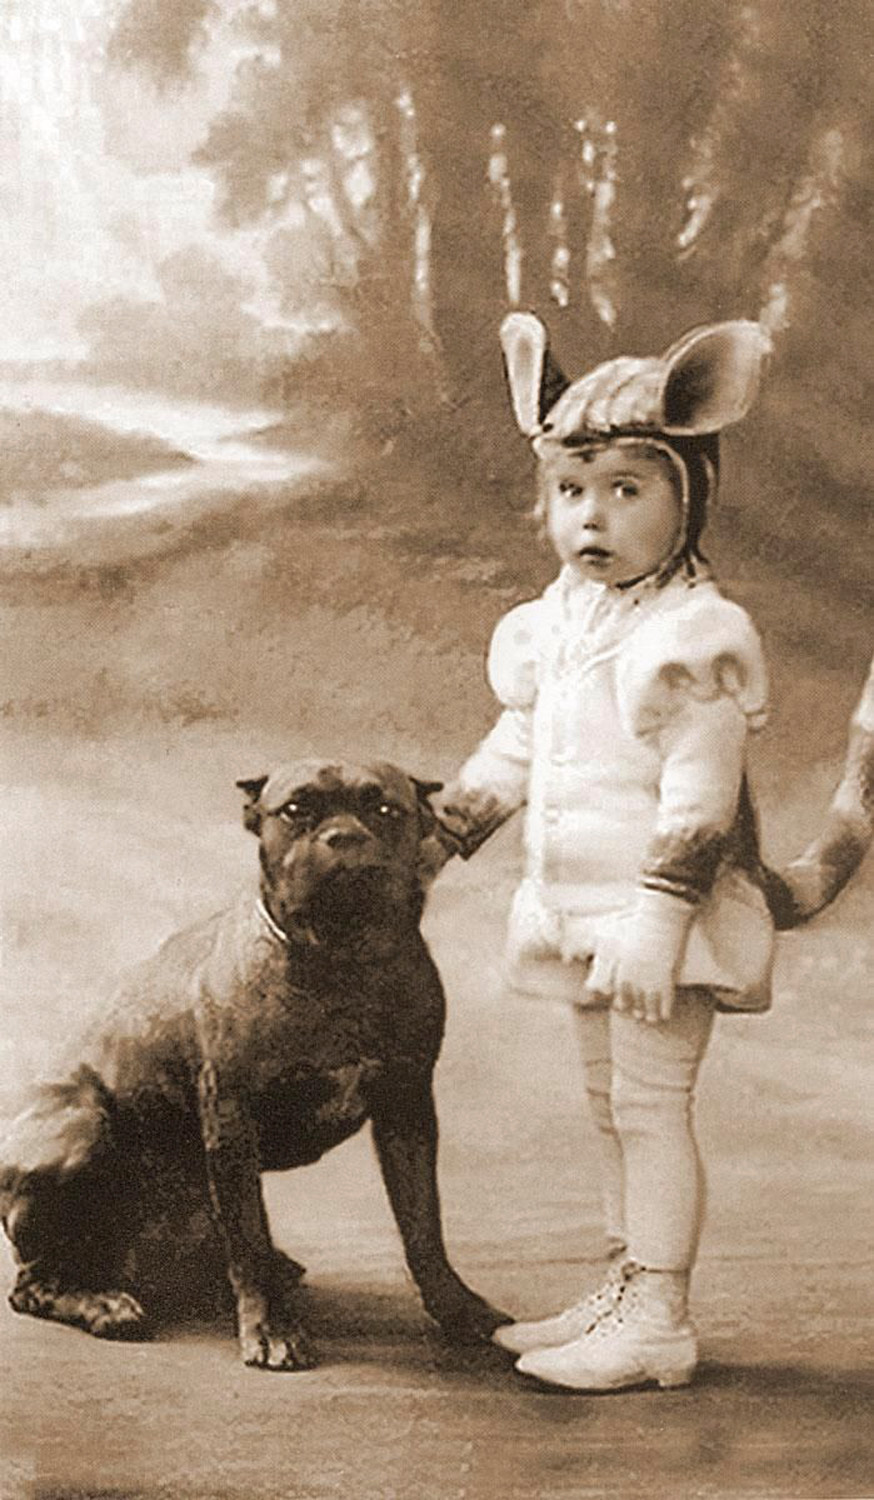 Dog experts have noted that at the turn of the 20th century, pit bulls were regarded as “nanny dogs,” ideal for guarding young children.